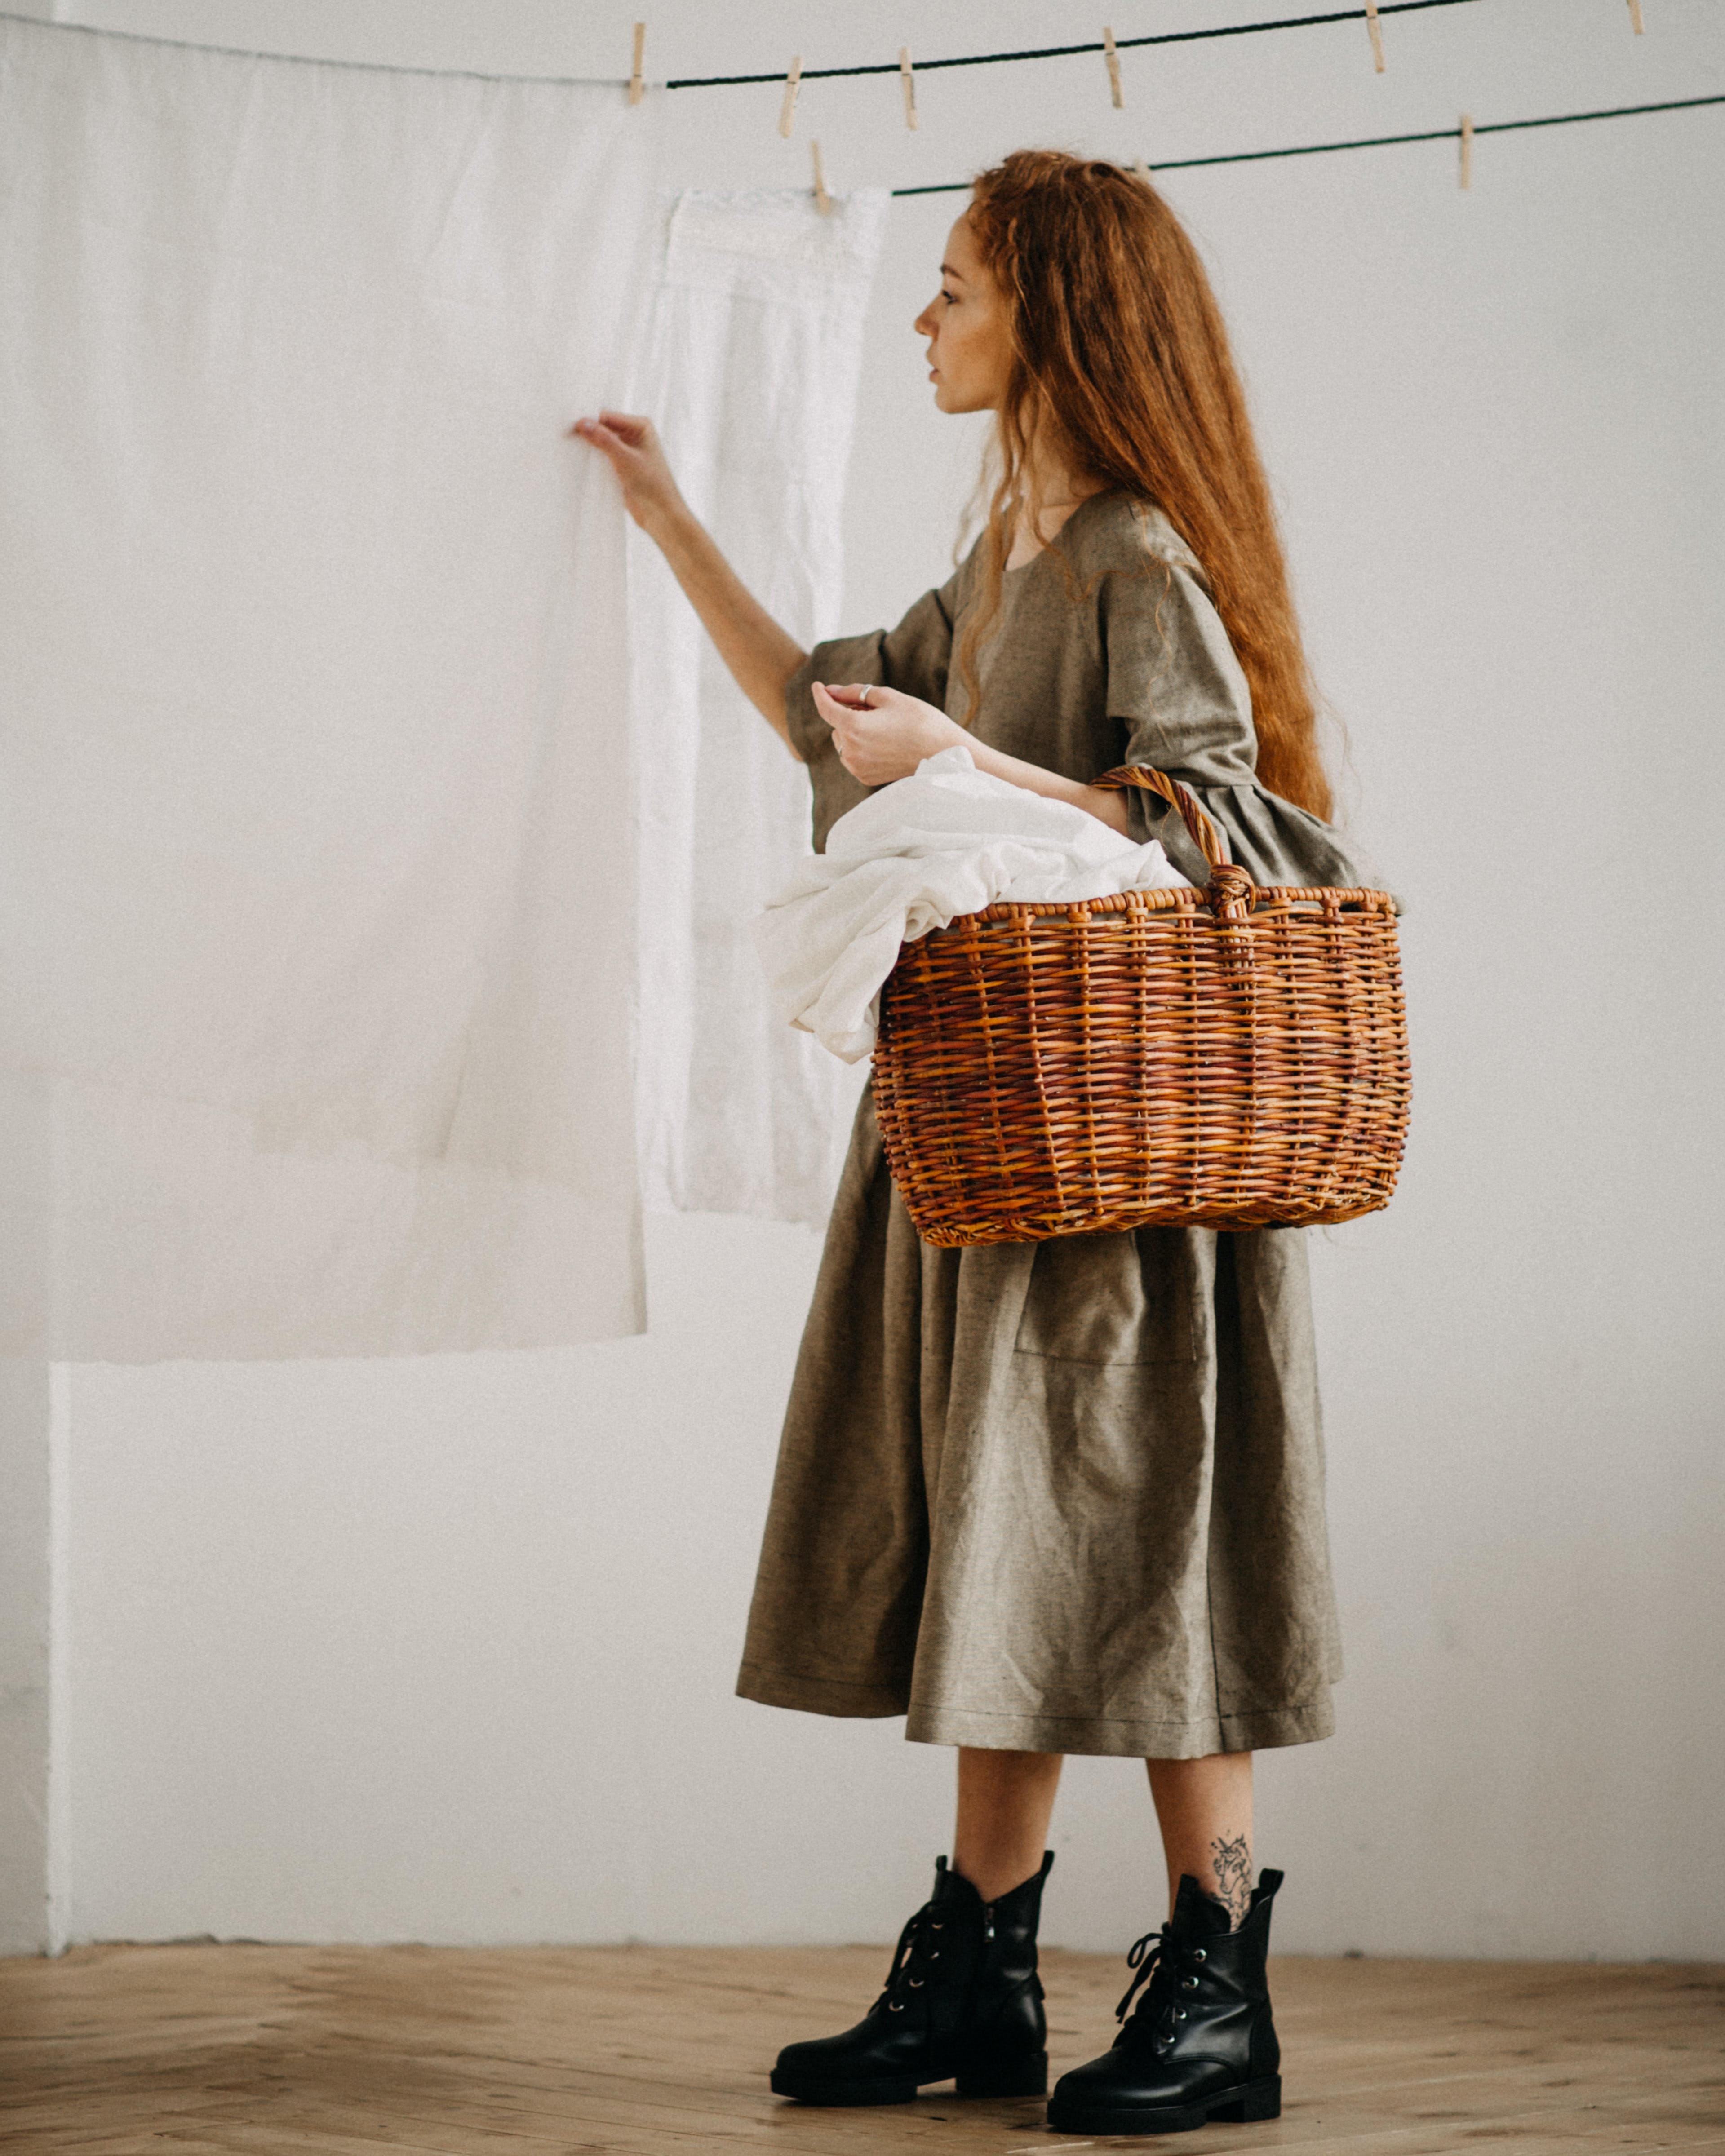 A woman carrying a laundry basket. | Source: Pexels